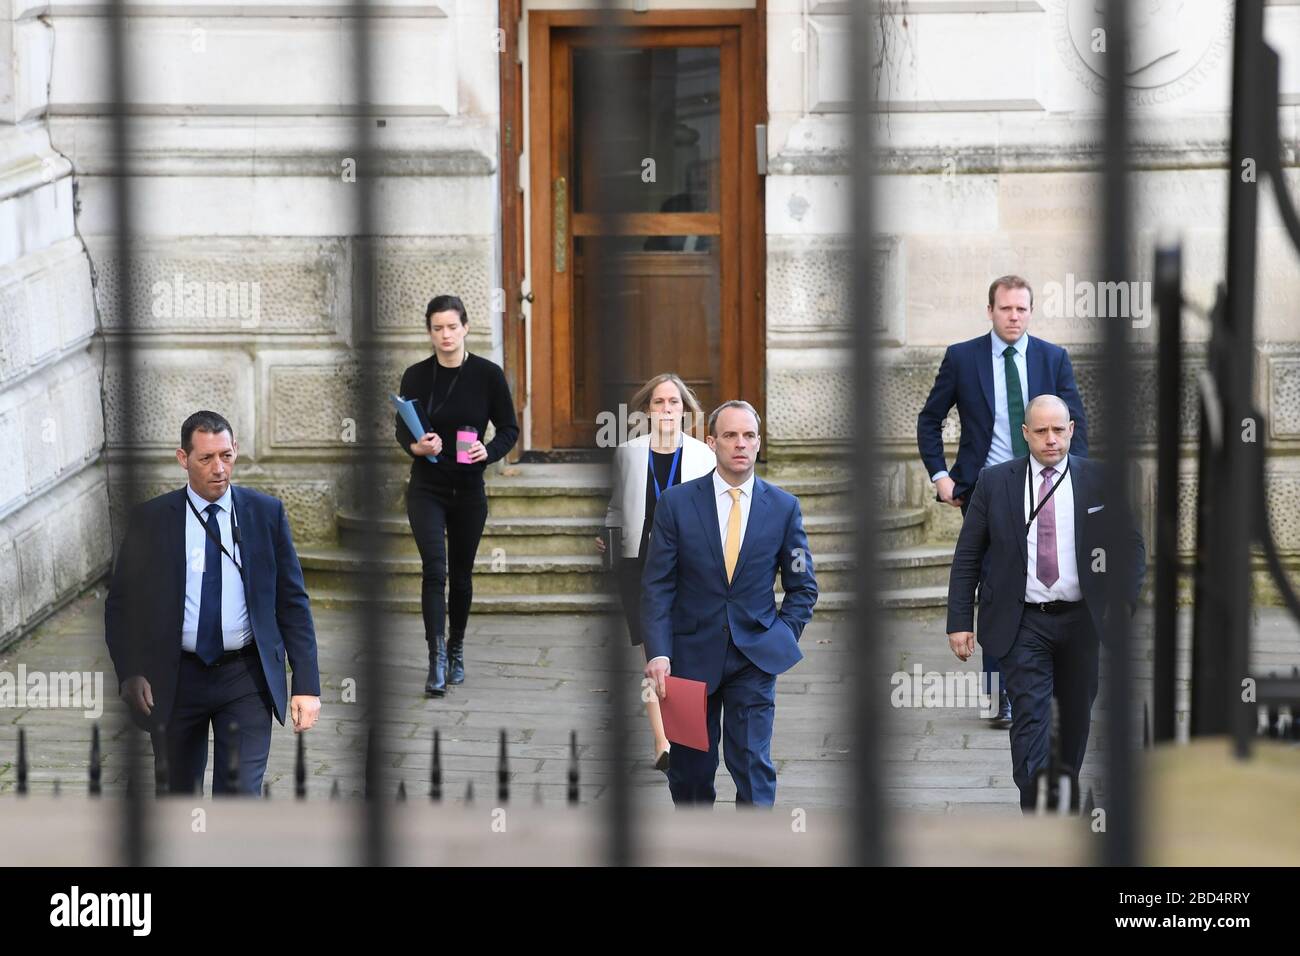 Foreign Secretary Dominic Raab (centre), who is taking charge of the Government's response to the coronavirus crisis after Prime Minister Boris Johnson was admitted to intensive care Monday, arrives at 10 Downing Street, London. Stock Photo